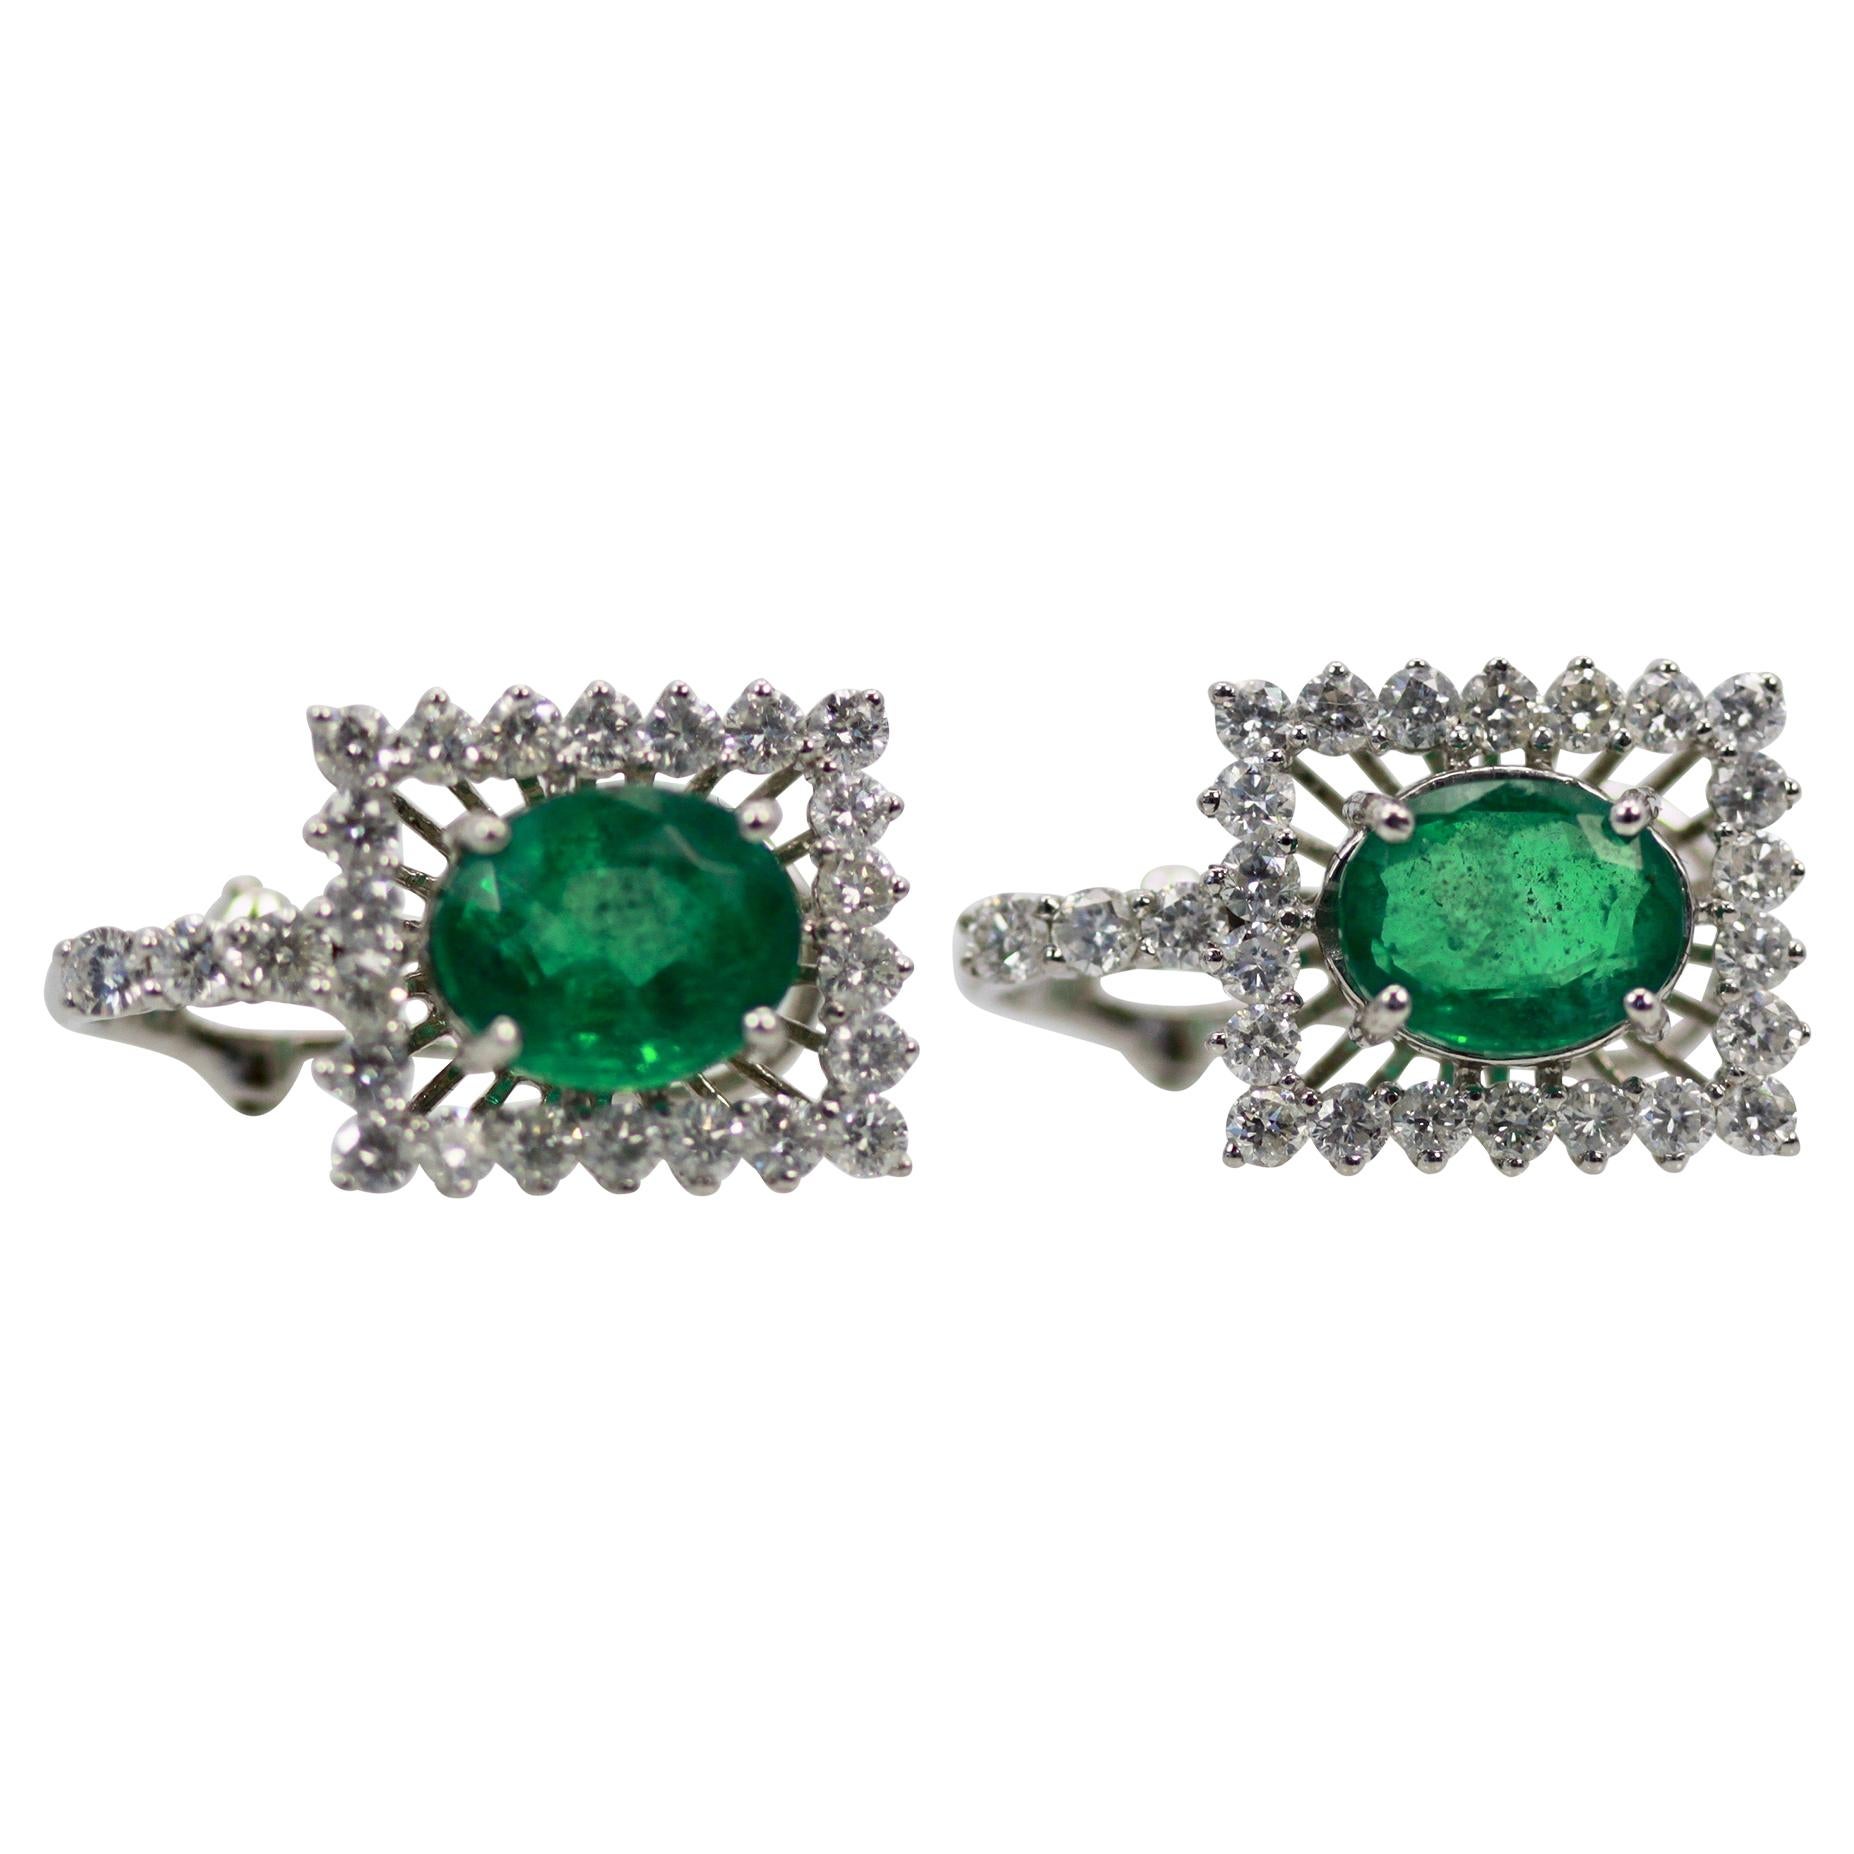 Oval Emerald Diamond and 18 Karat White Gold Earrings 5.83 Total Carat Weight